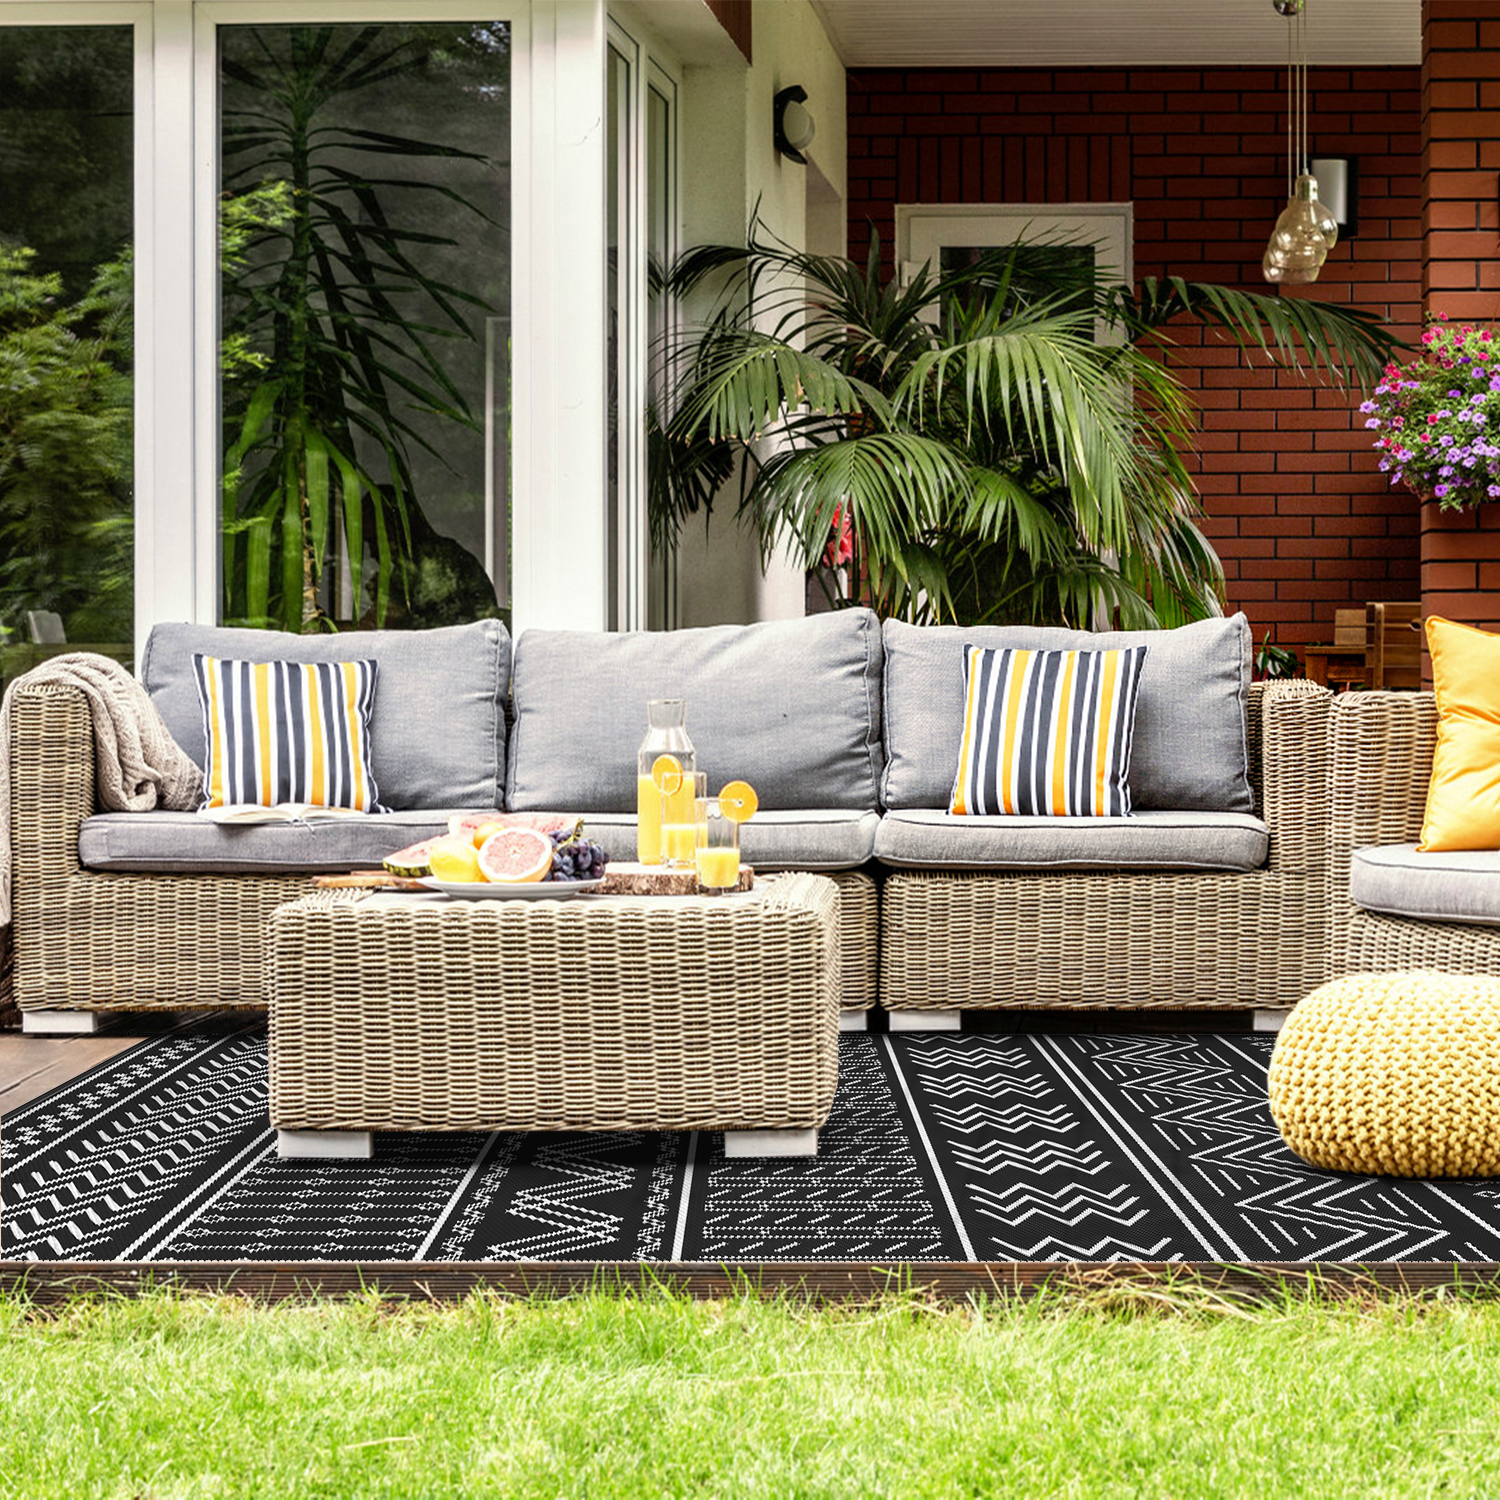 SIXHOME Outdoor Rug 5'x8' Waterproof Patio Rug Reversible Indoor Outdoor Rug Lightweight Plastic Straw Rug for RV Camping Deck Balcony Boho Porch Decor Black and White - image 3 of 10